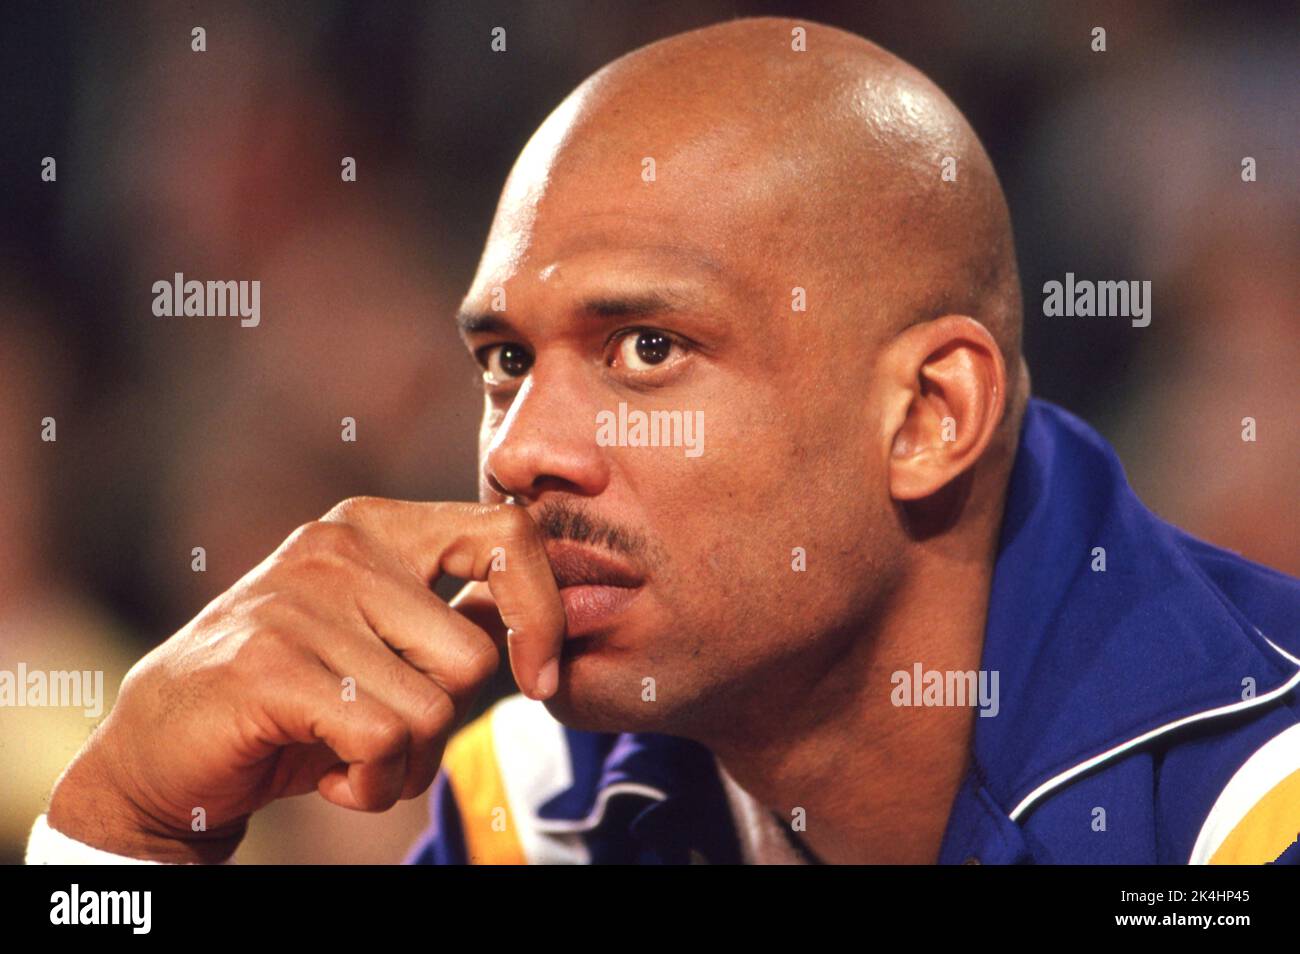 NBA superstar Kareem Abdul-Jabbar is shown on the bench during the waning years of his career with the Los Angeles Lakers in 1988. Stock Photo